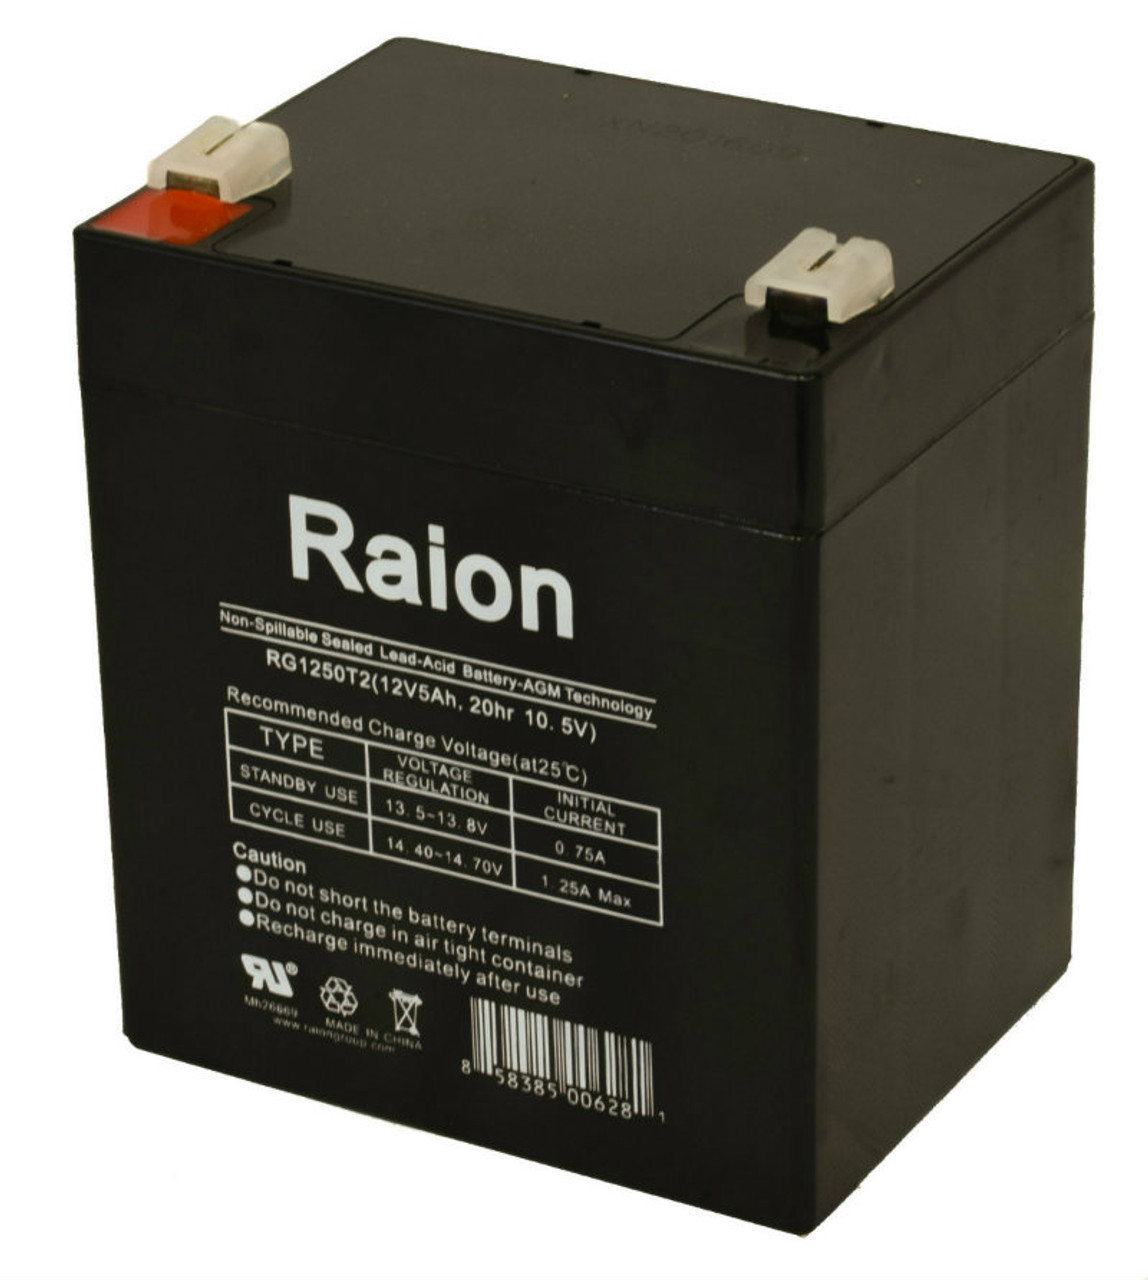 Raion Power RG1250T1 Replacement Fire Alarm Control Panel Battery for Ademco 4110DL